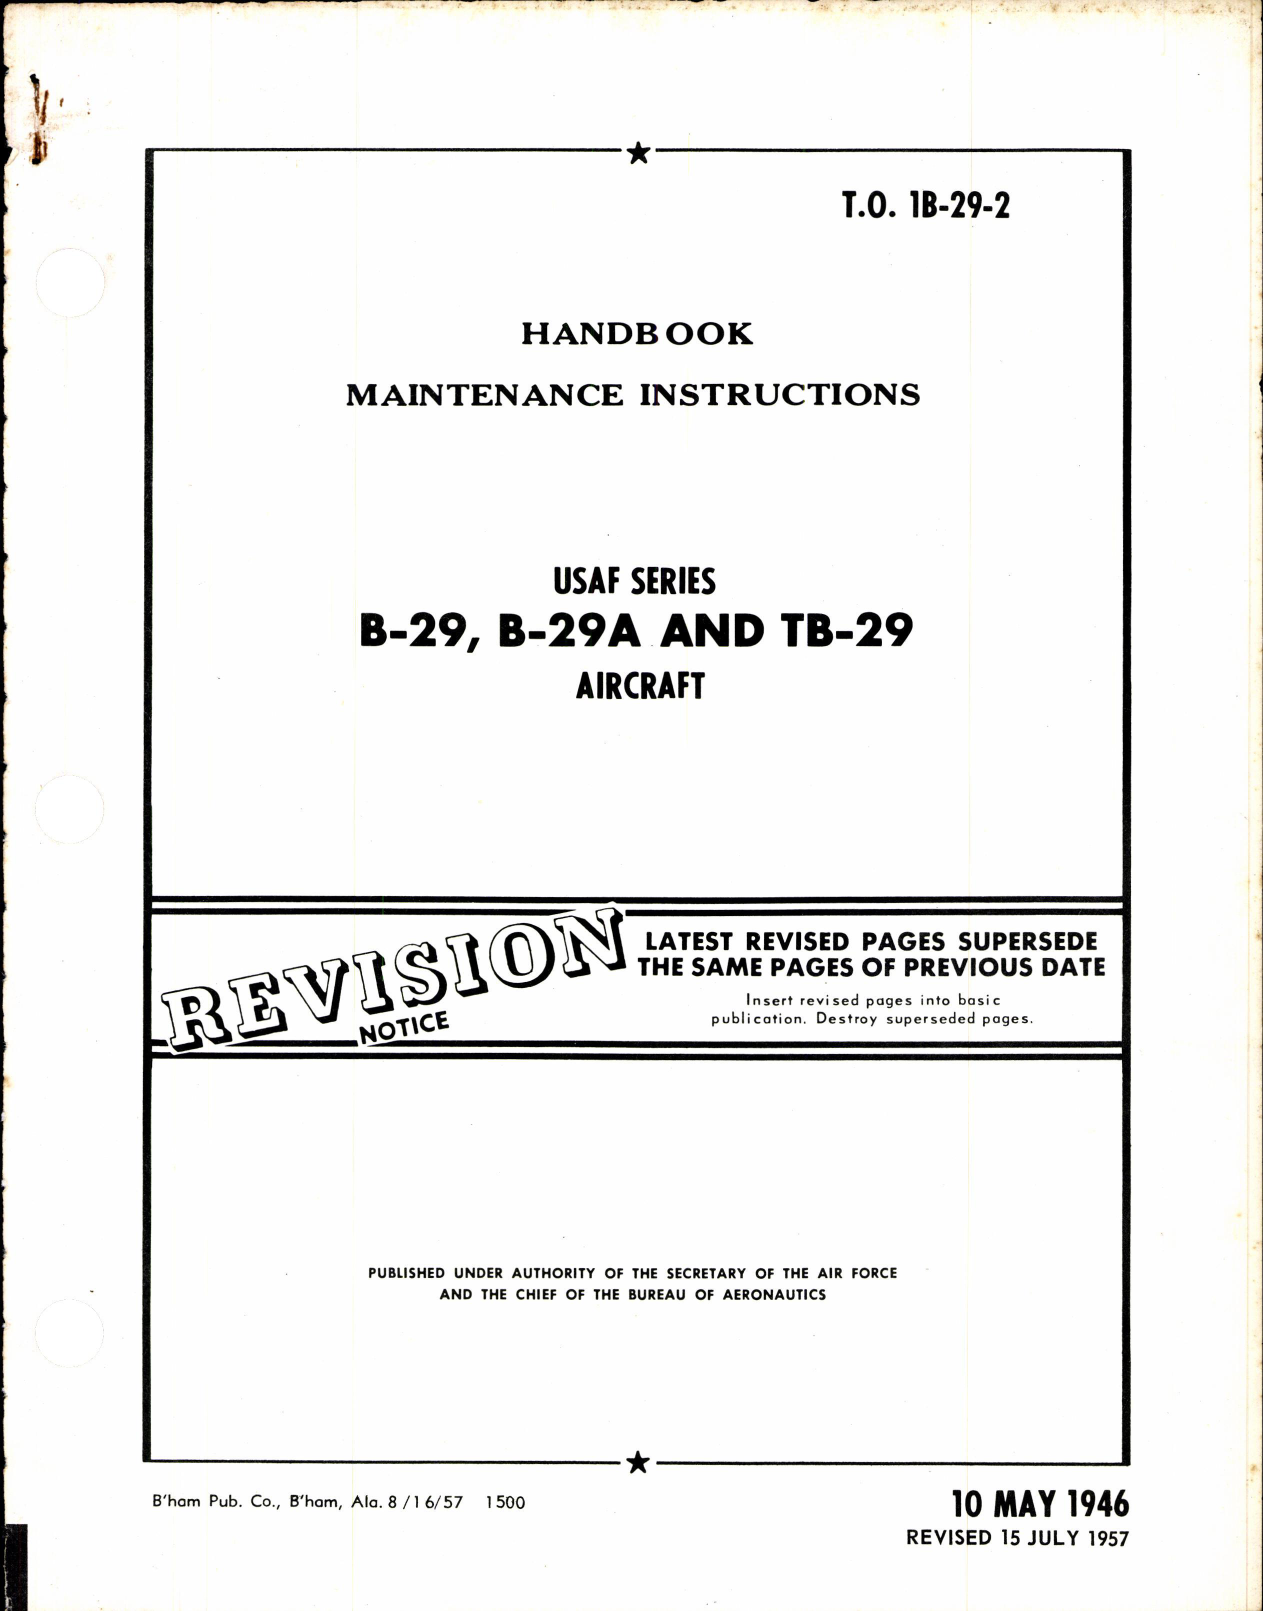 Sample page 1 from AirCorps Library document: Maintenance Instructions for B-29, B-29A, & TB-29 Aircraft